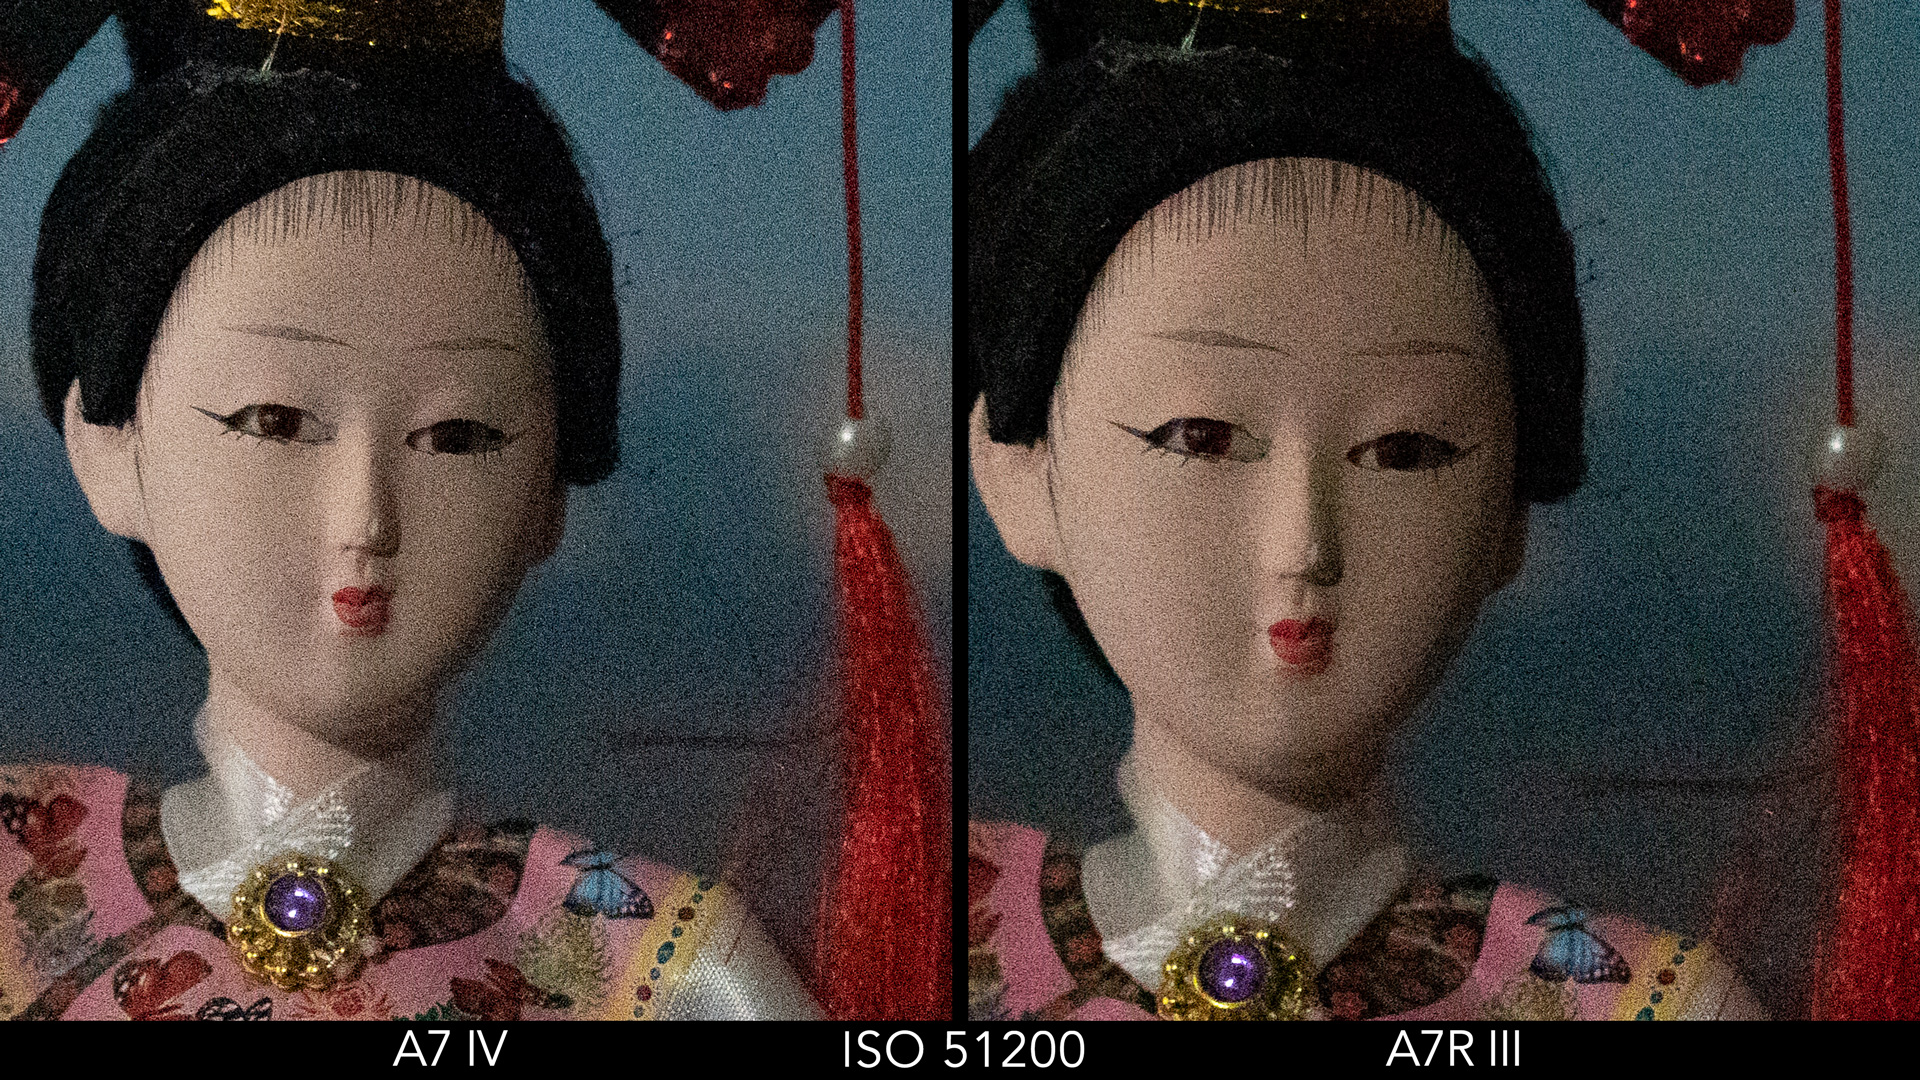 Side by side crop showing the quality at ISO 51200 for the A7 IV and A7R III